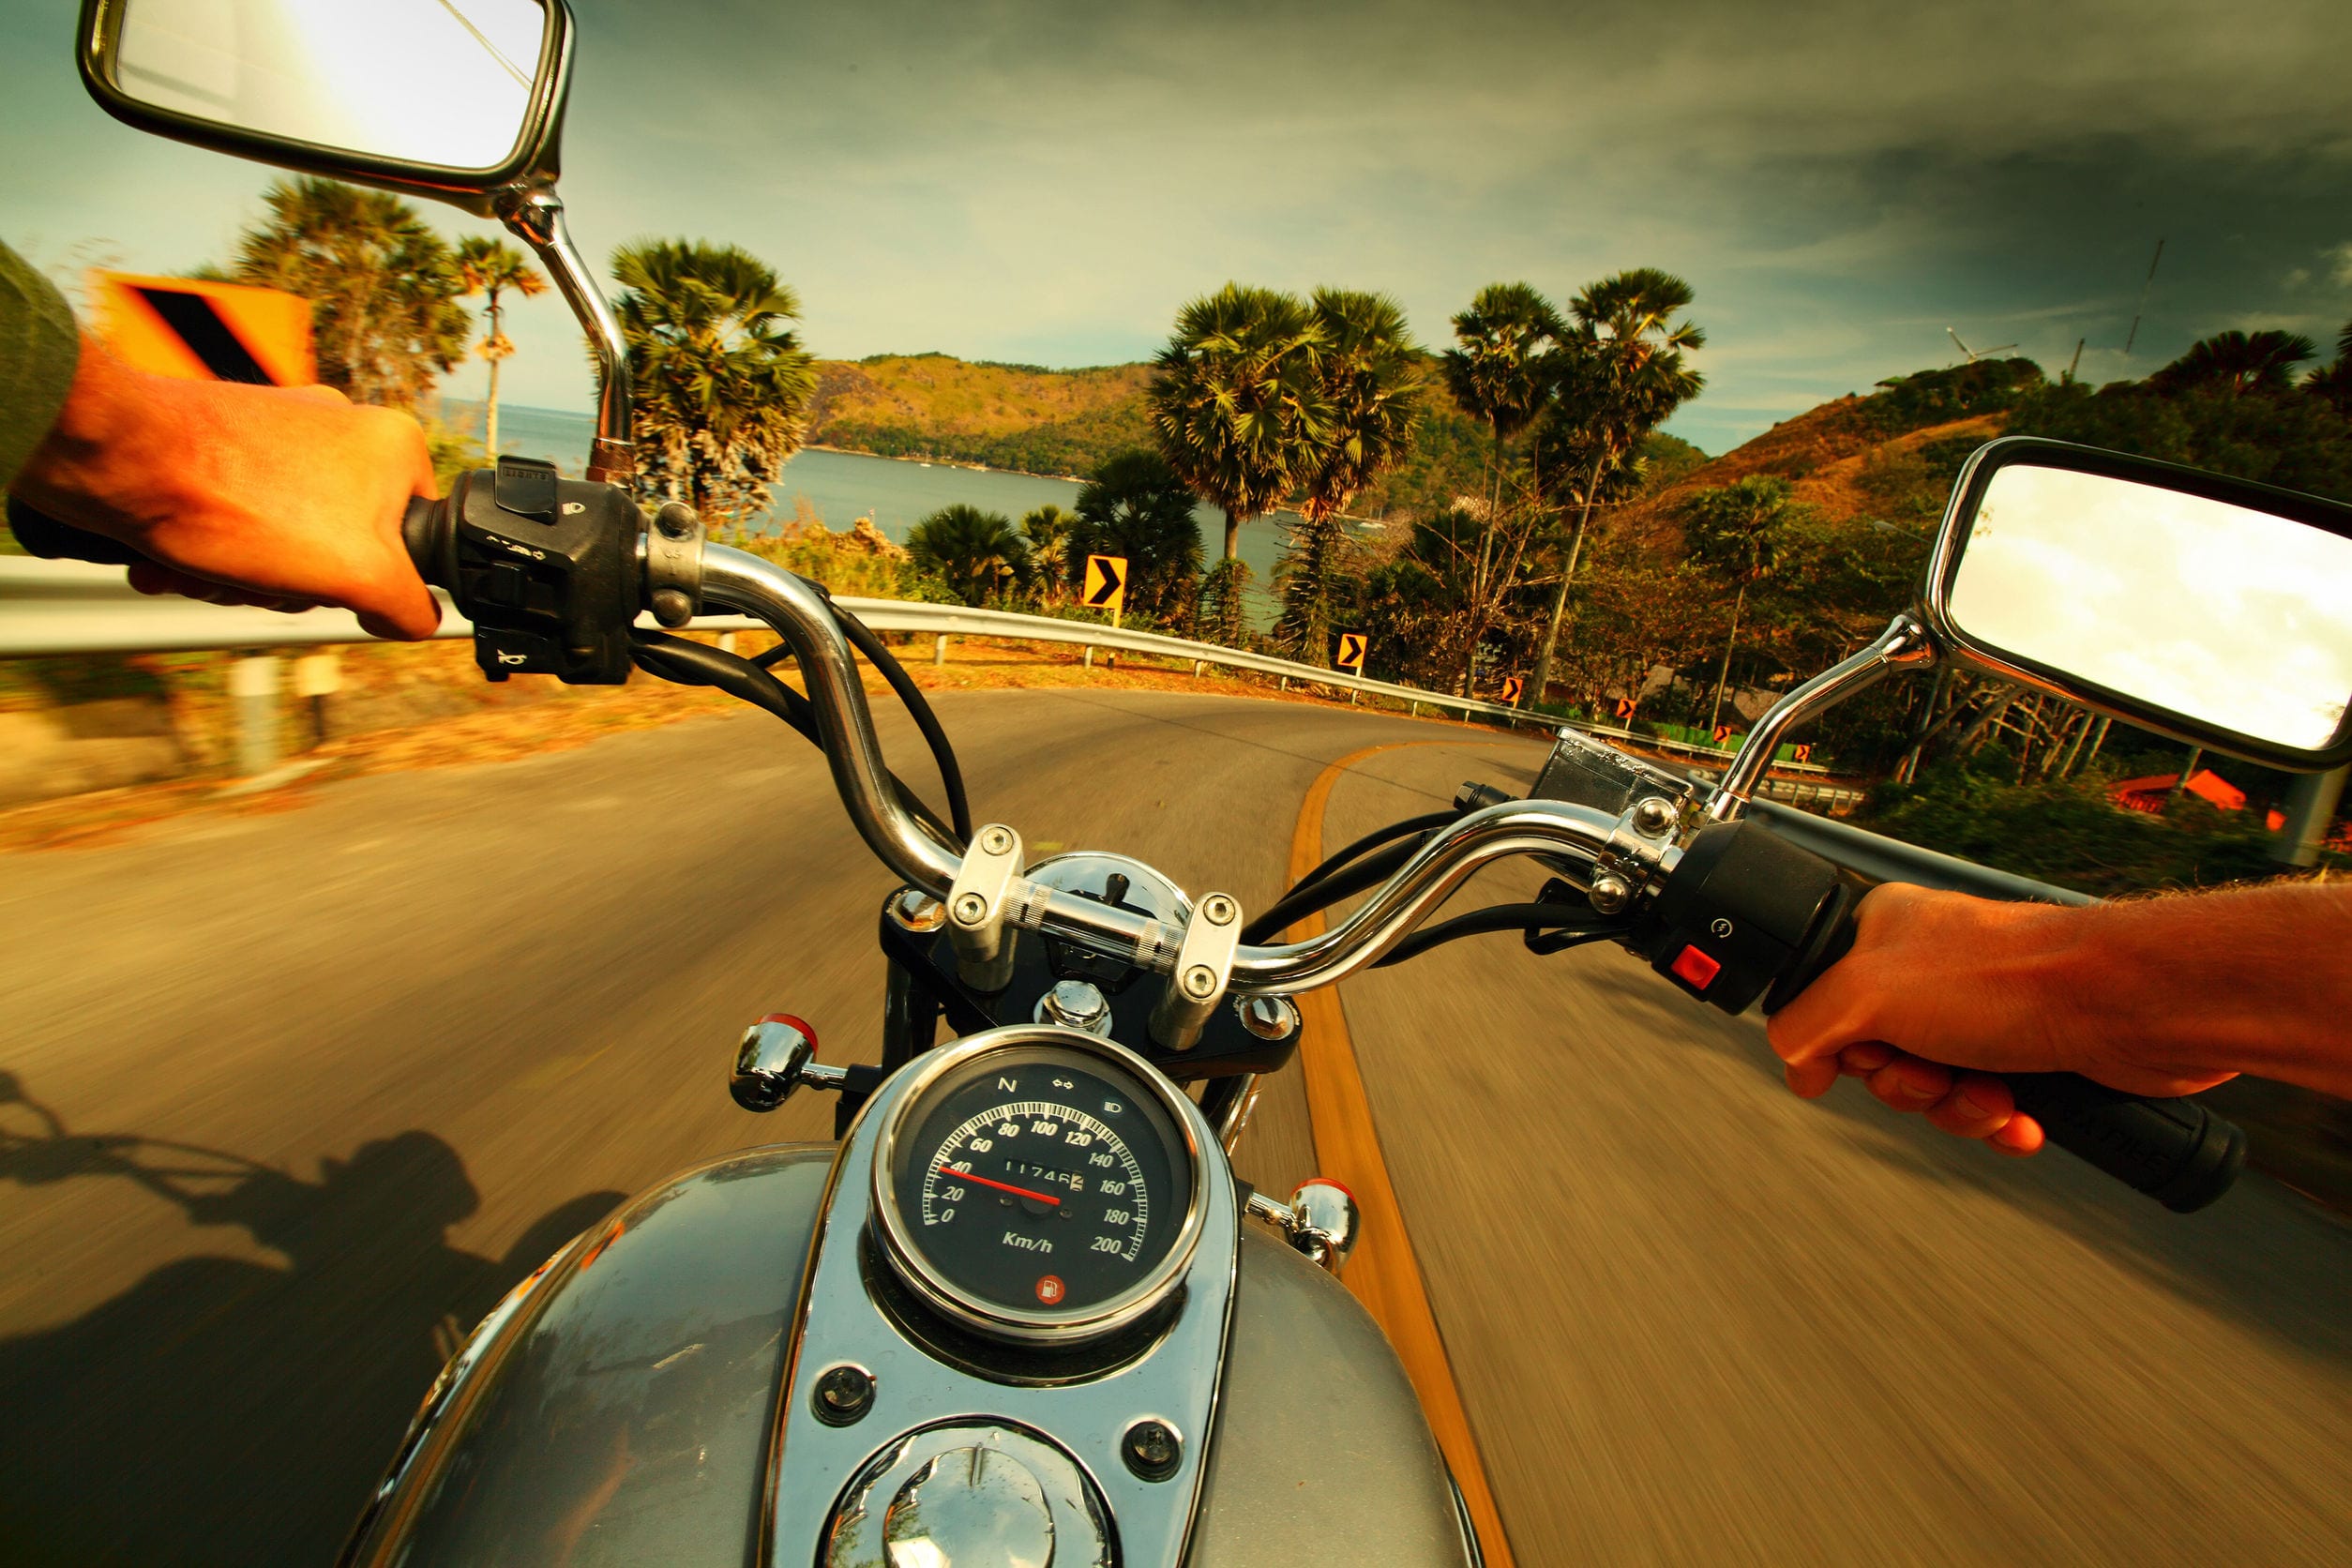 How Dangerous Is It to Ride a Motorcycle in Florida?